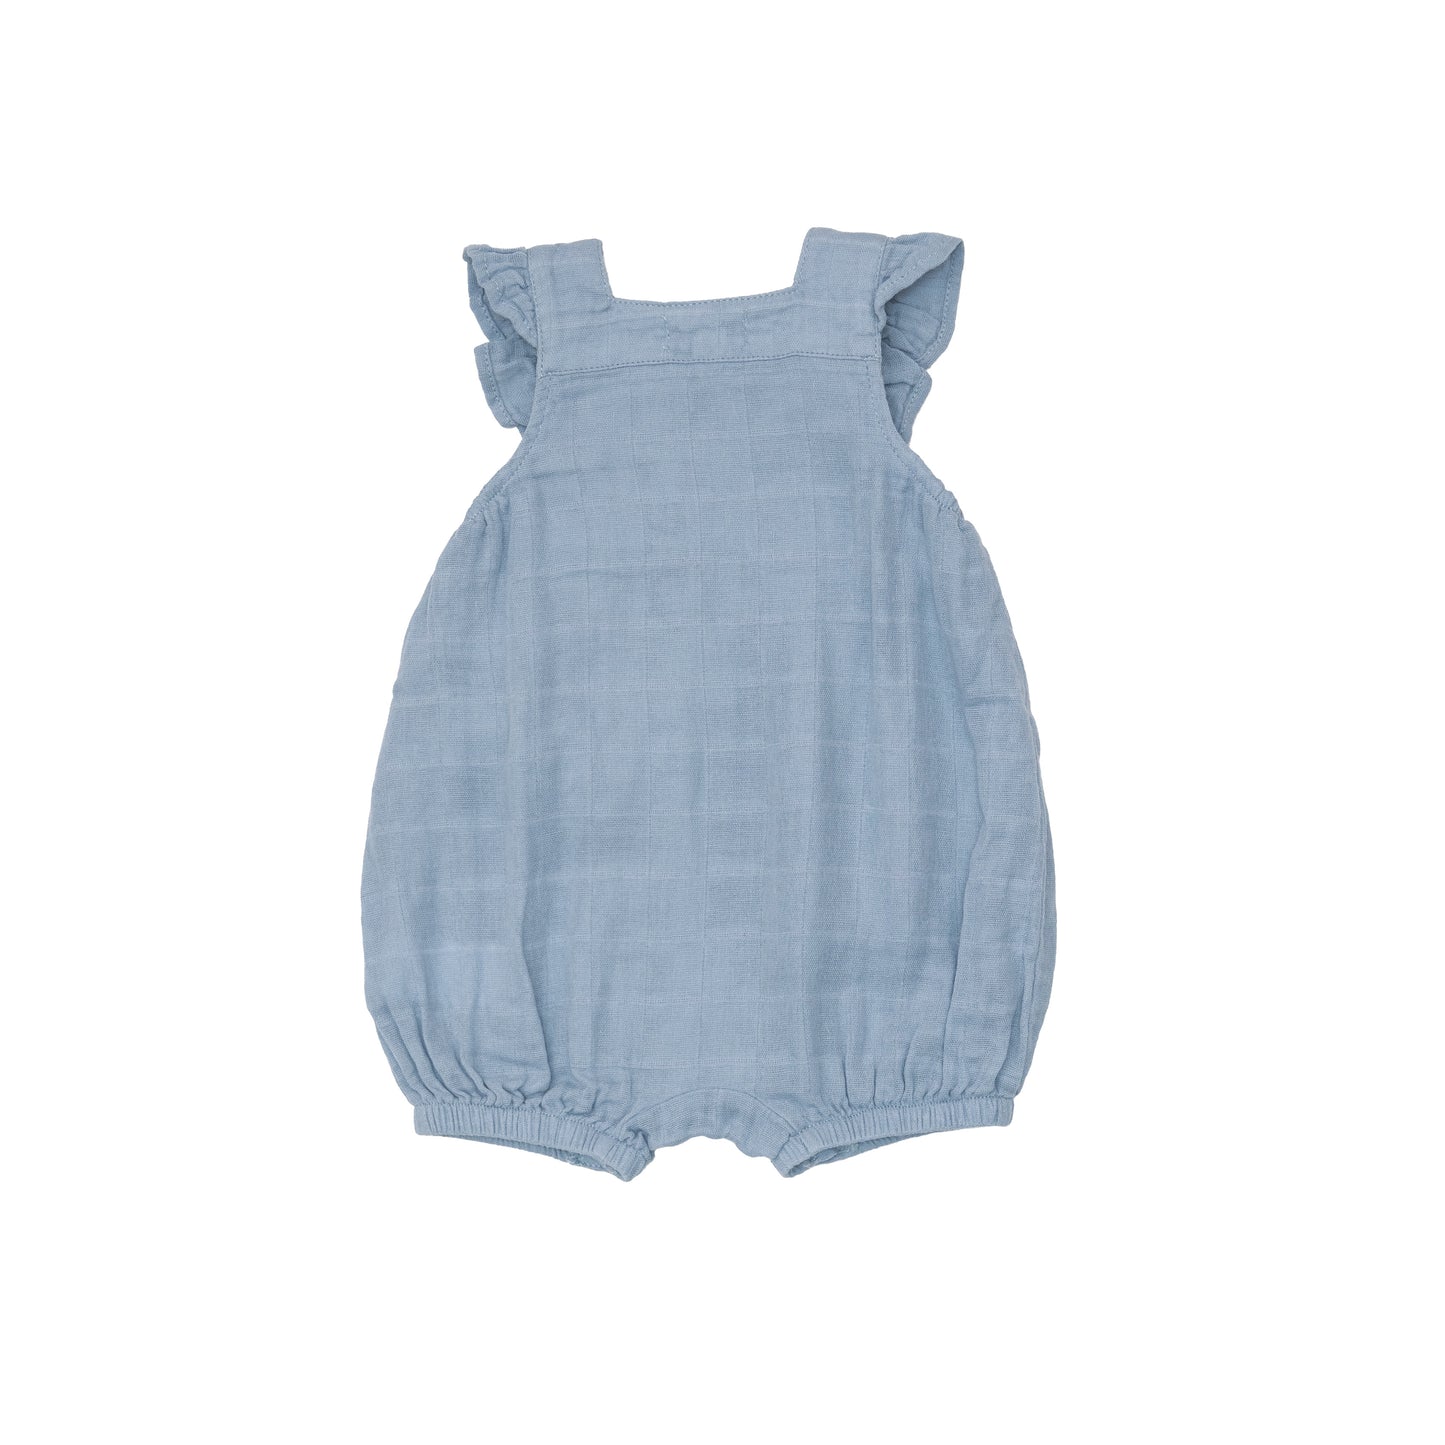 Smocked Overall Shortie Muslin- Soft Chambray